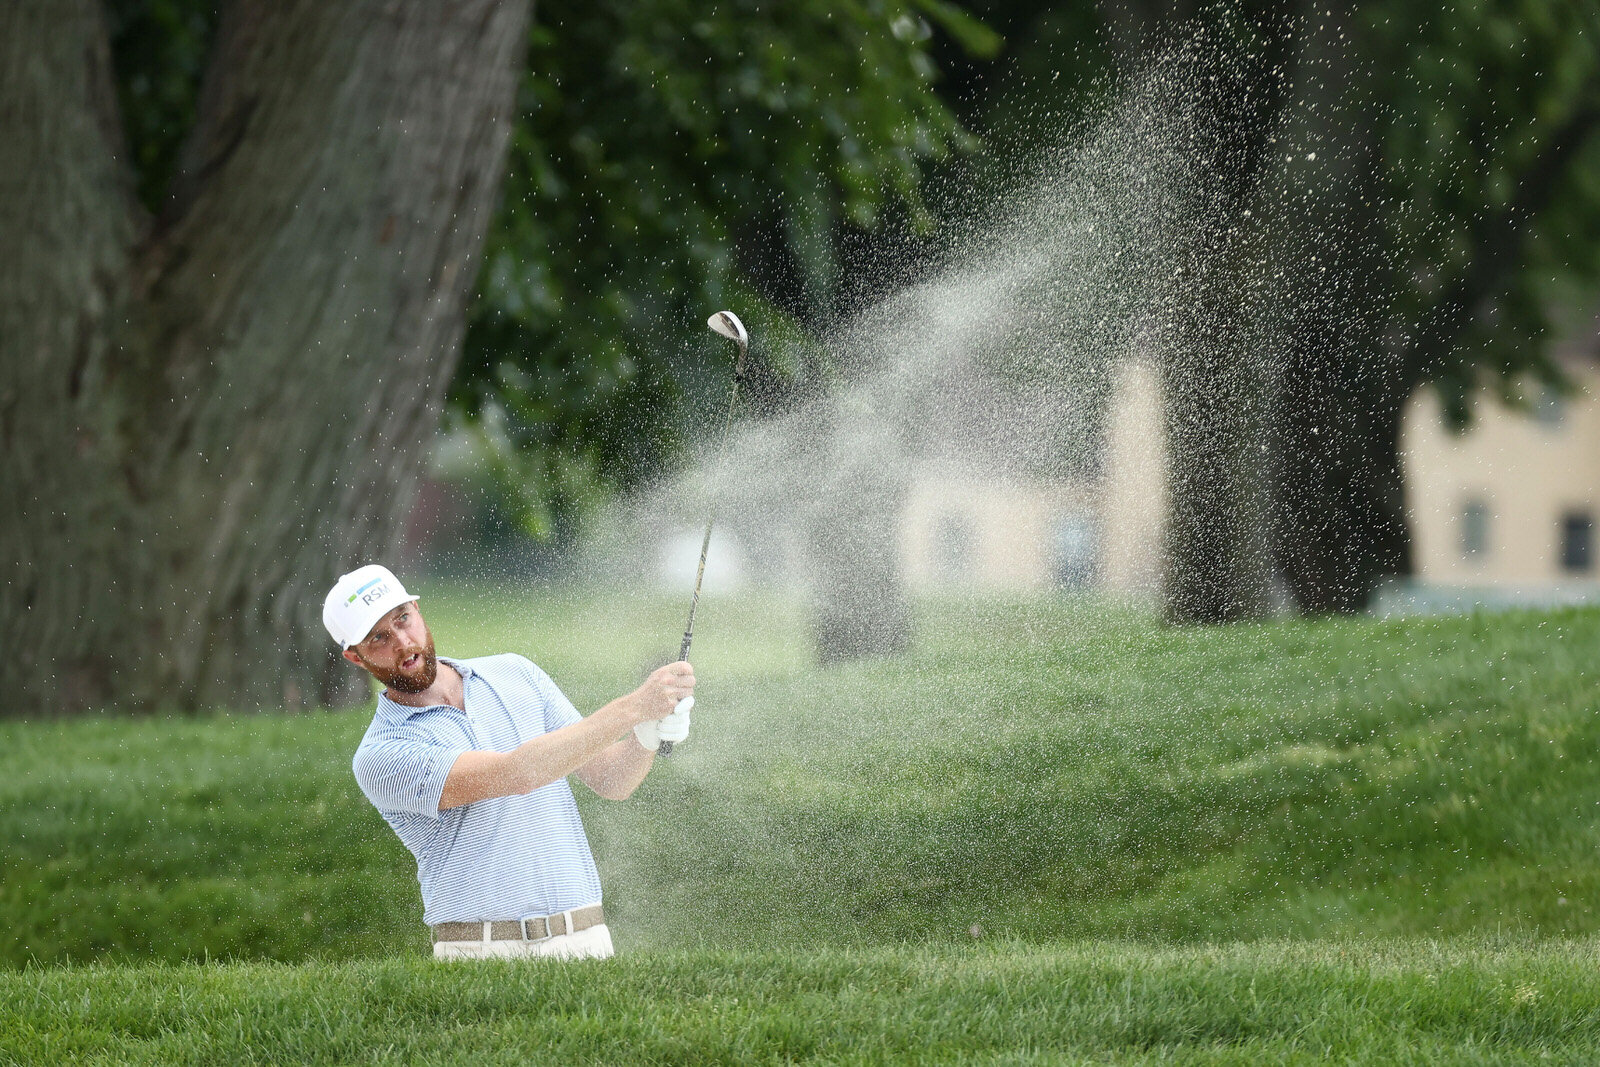  DETROIT, MICHIGAN - JULY 03: Chris Kirk of the United States plays a shot from a bunker on the 17th hole during the second round of the Rocket Mortgage Classic on July 03, 2020 at the Detroit Golf Club in Detroit, Michigan. (Photo by Gregory Shamus/